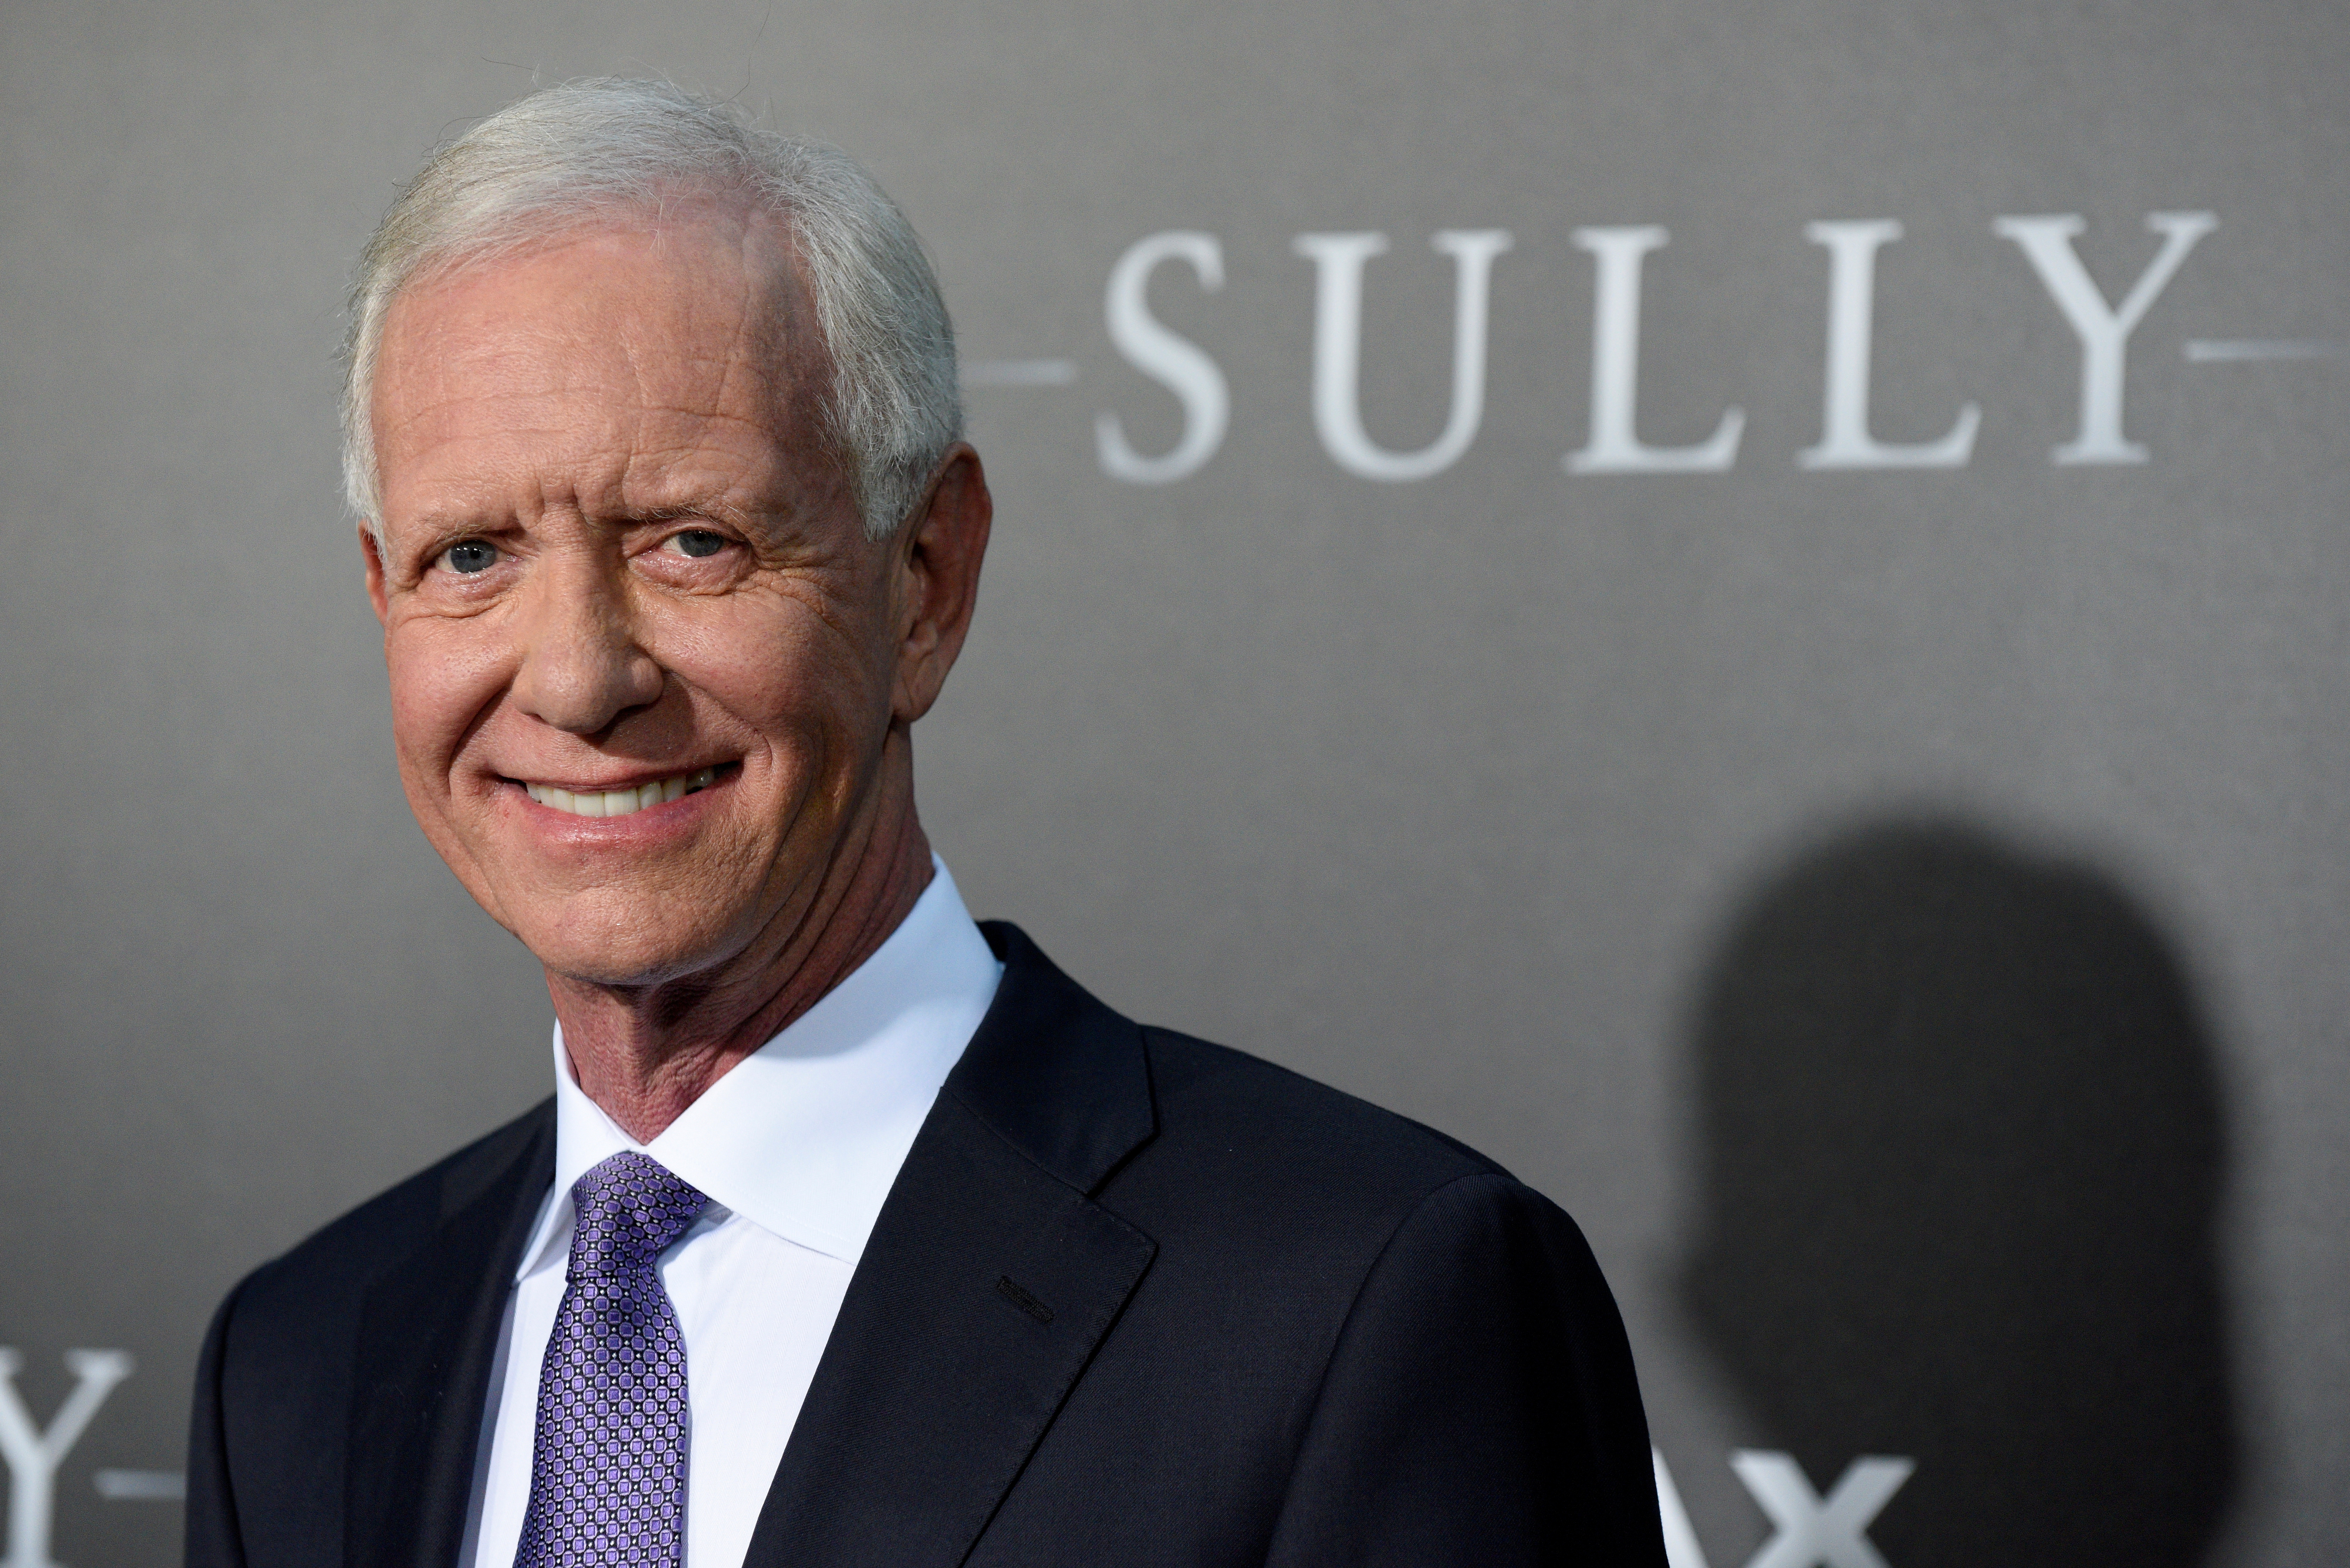 Captain Chesley 'Sully' Sullenberger attends the New York premiere of the film 